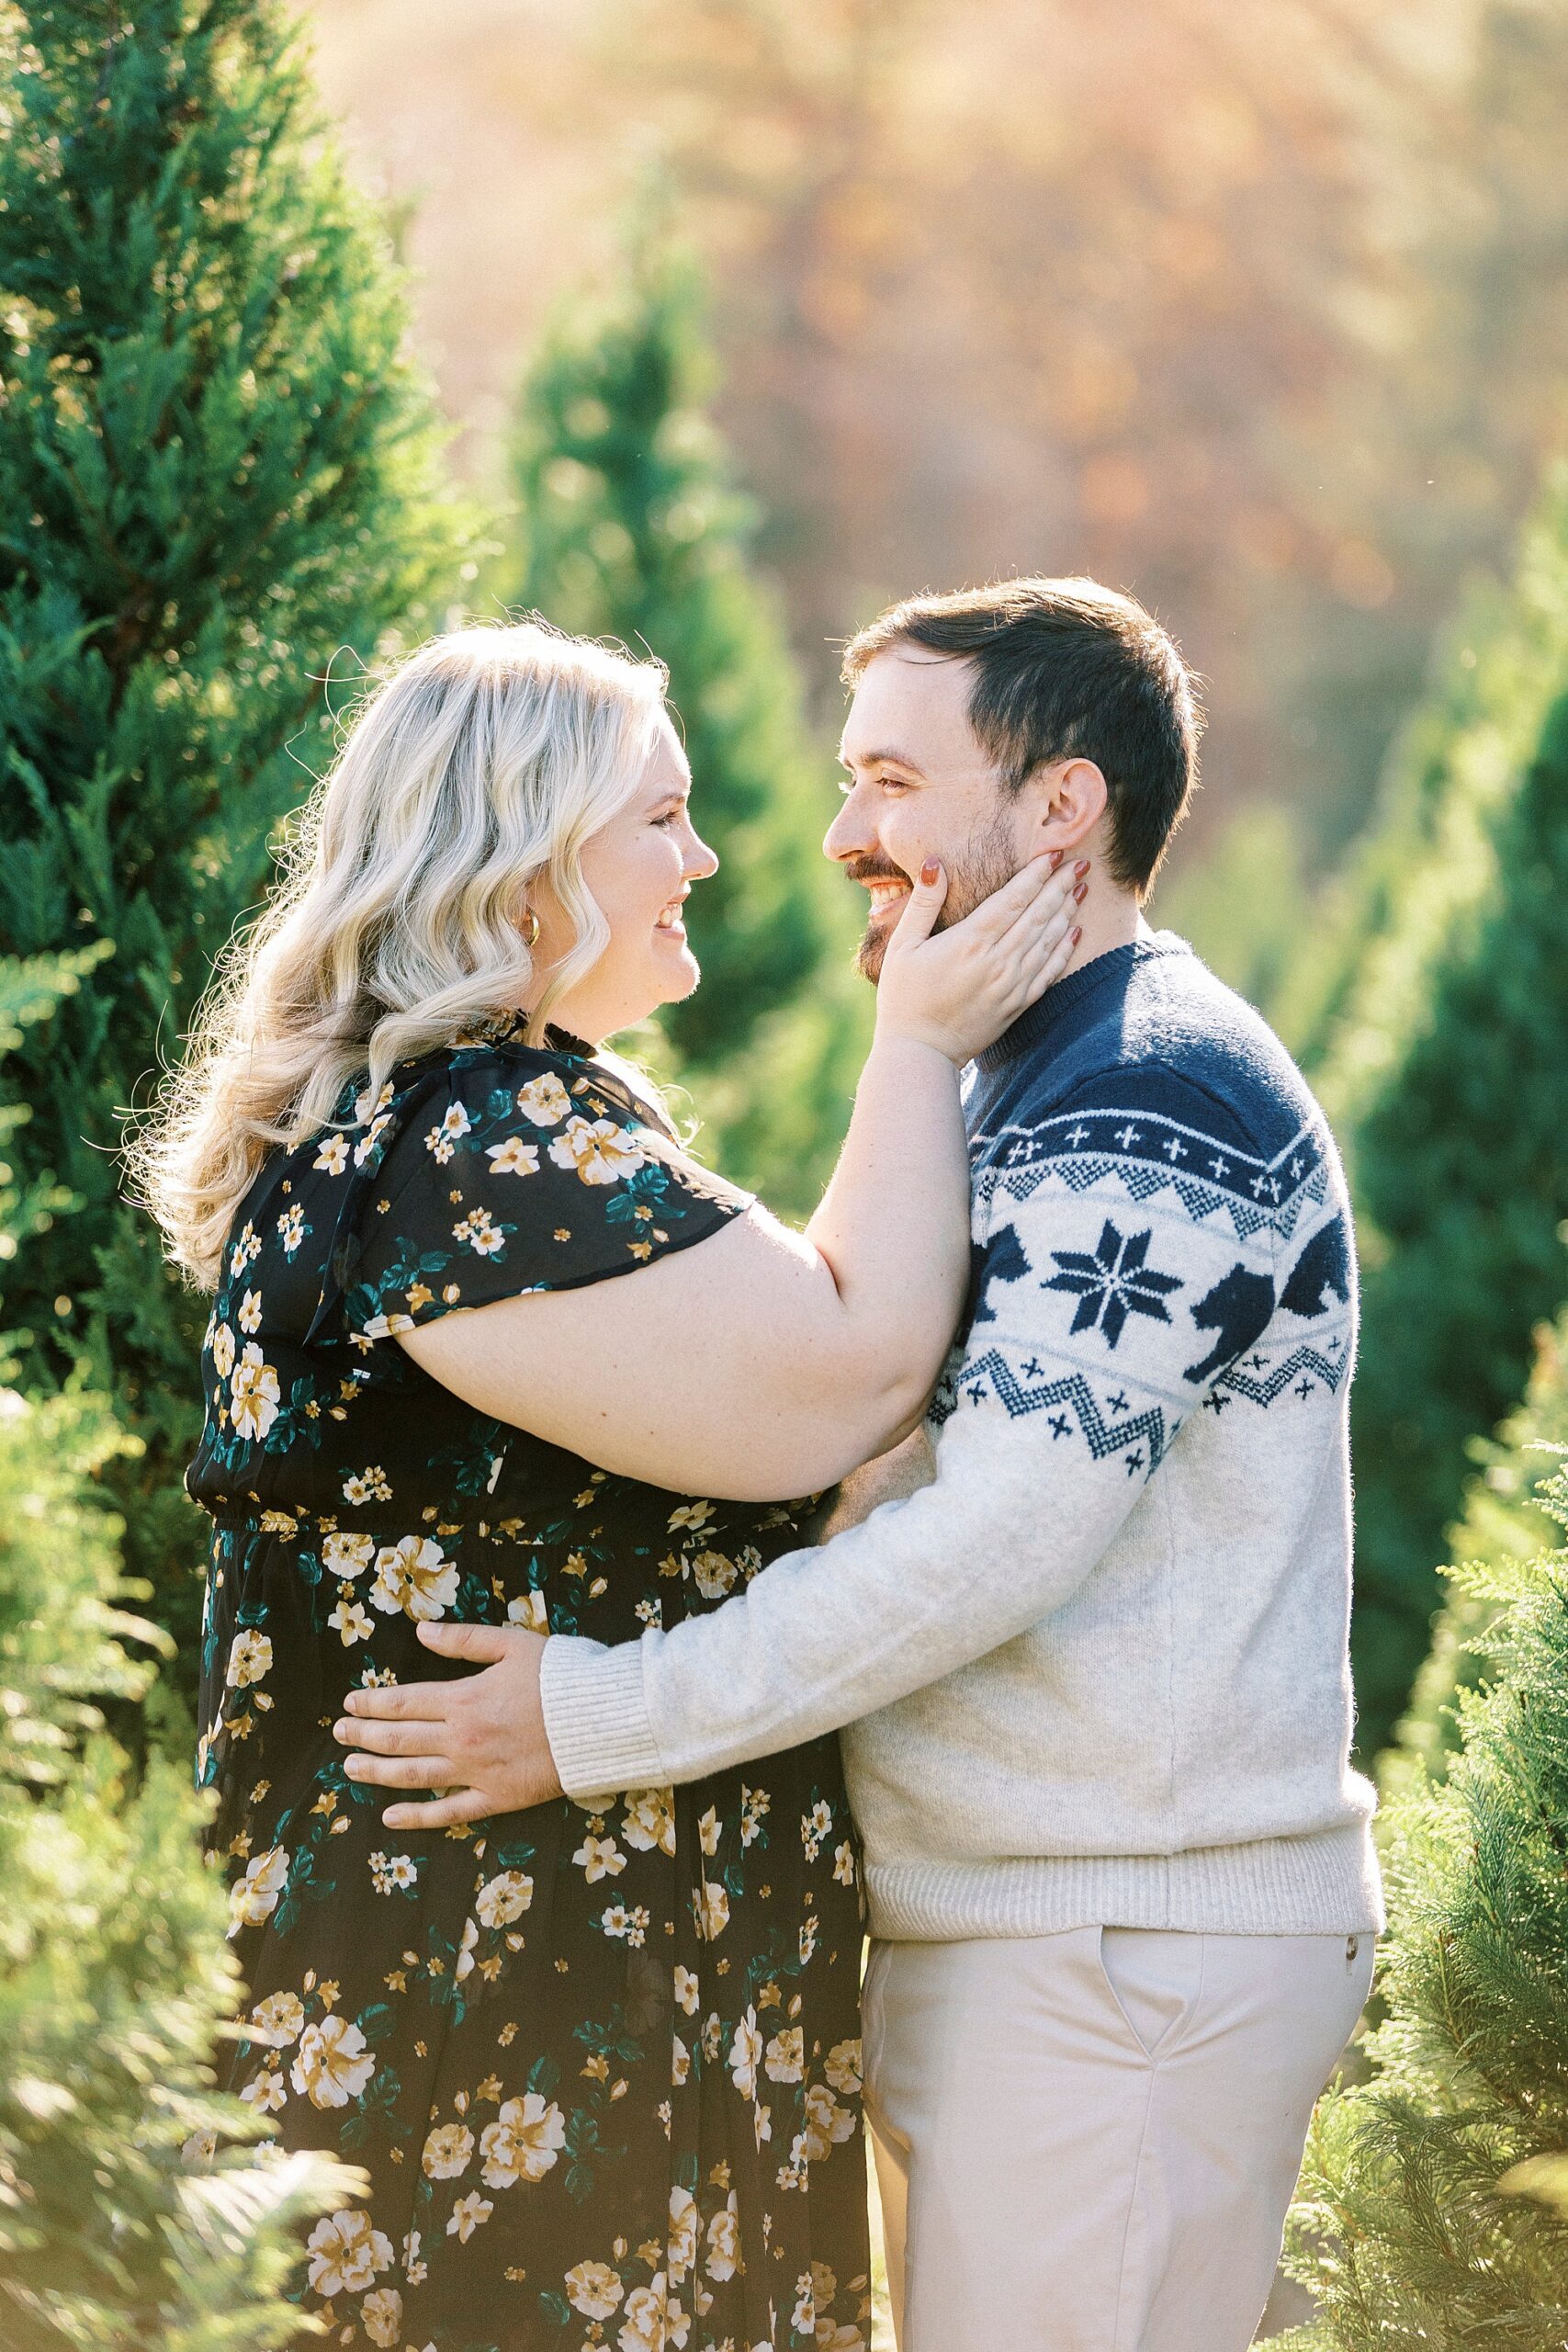 blonde woman reaches up to touch man's face during holiday mini sessions